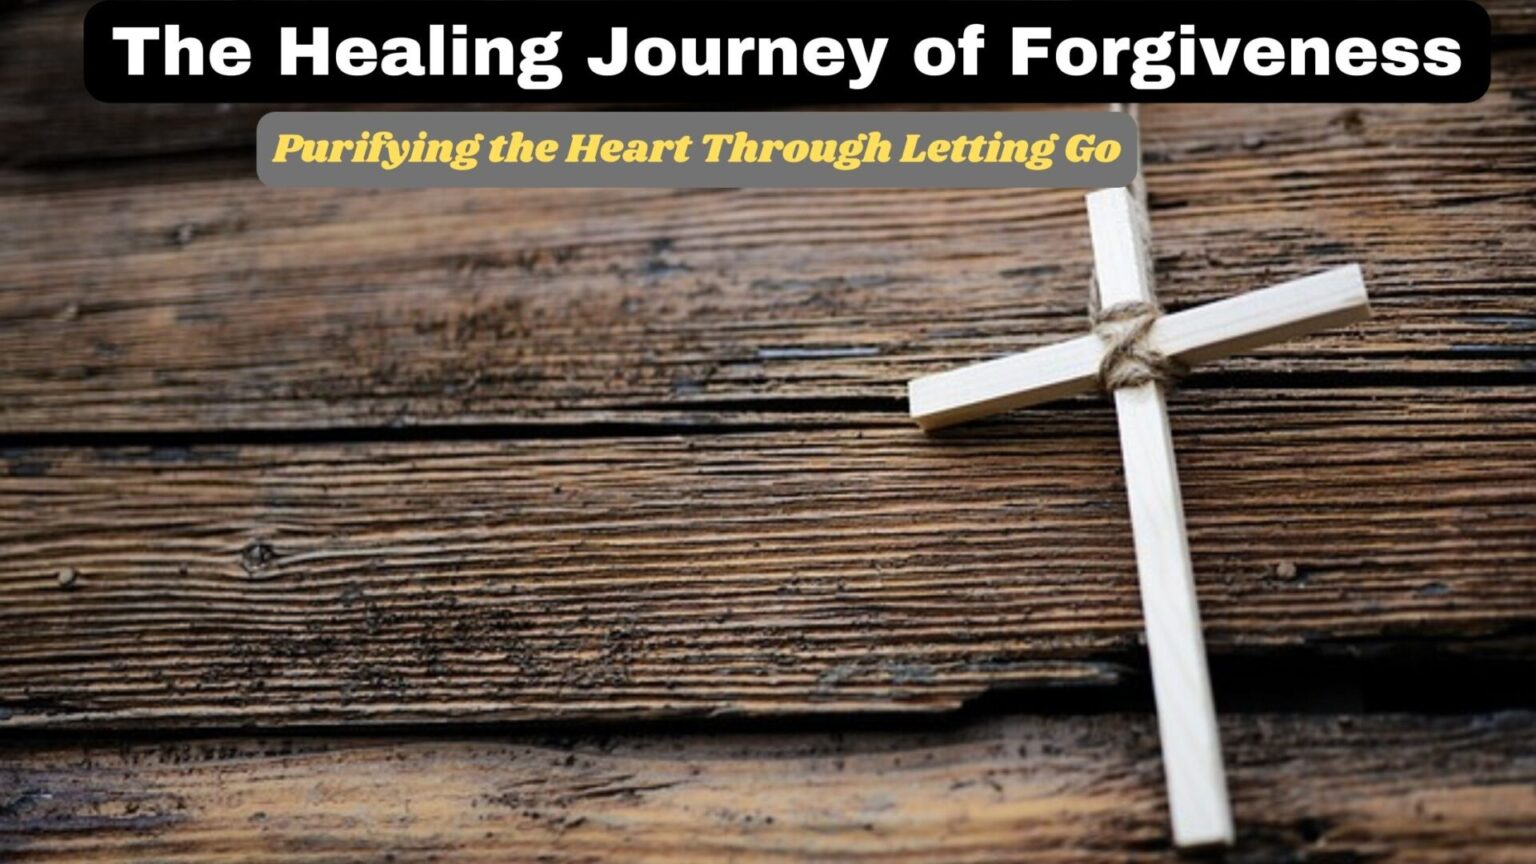 The Healing Journey of Forgiveness: Purifying the Heart Through Letting Go